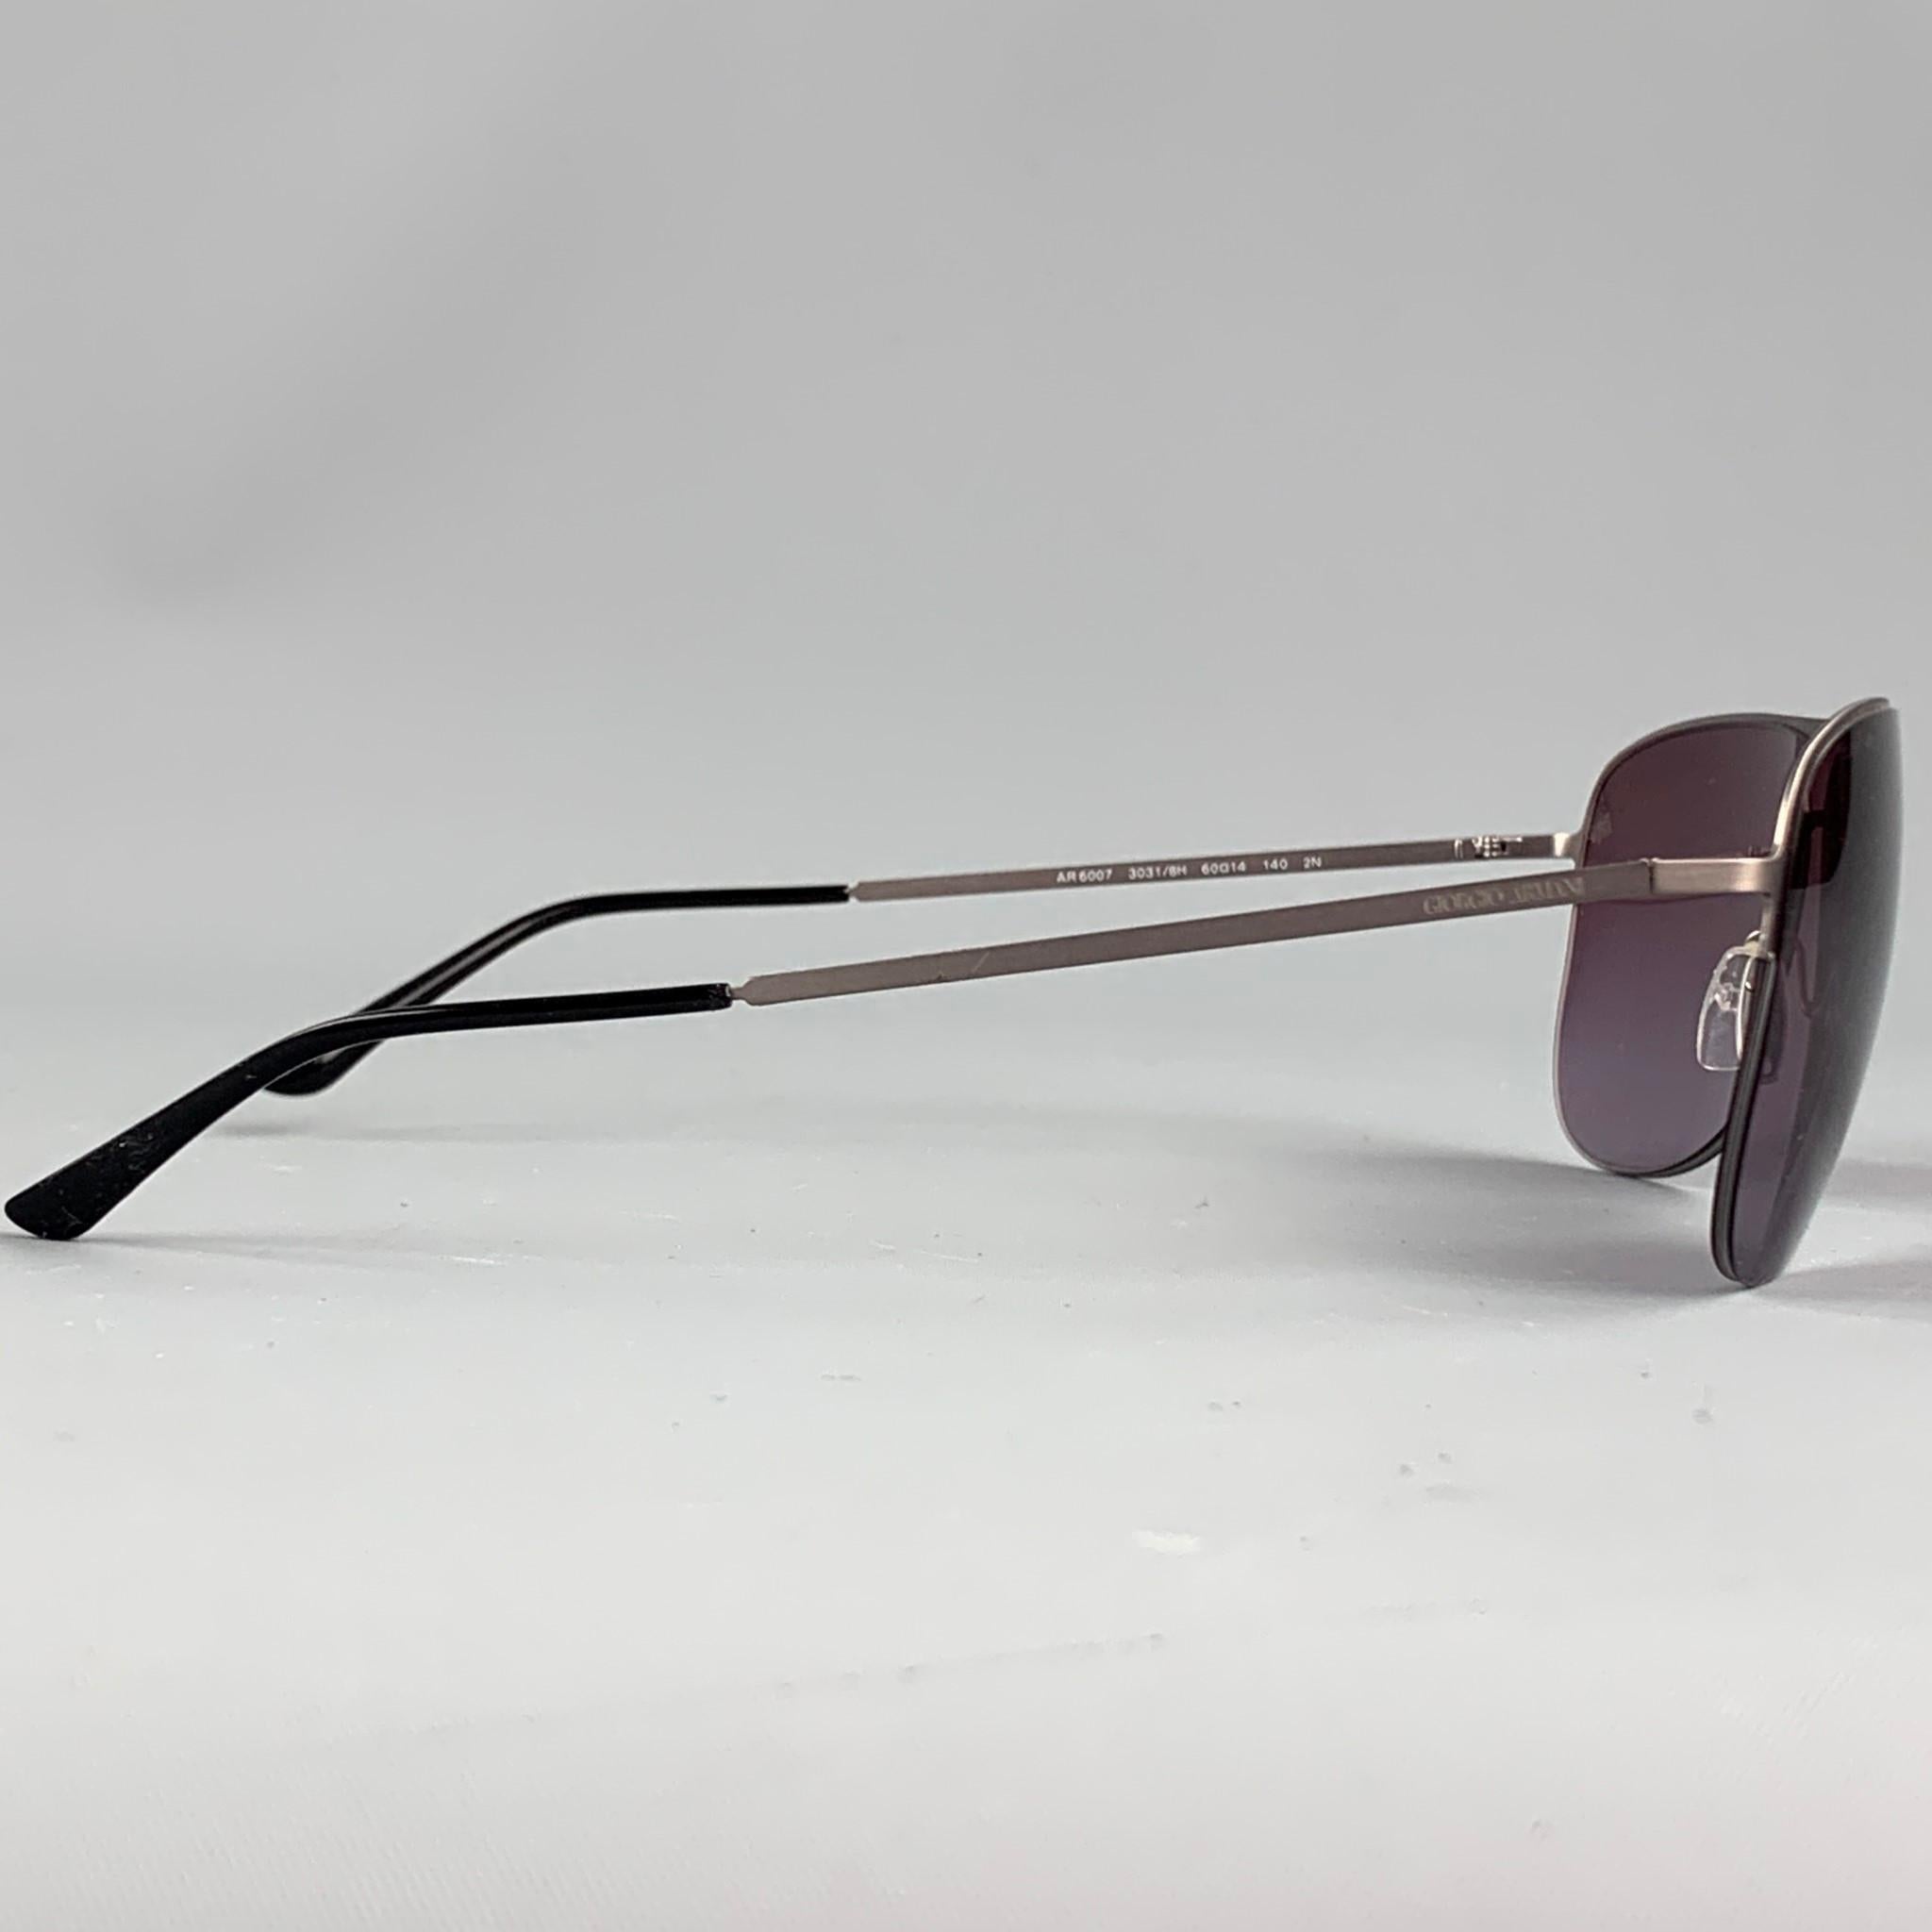 x3 sunglasses private listing 

GIORGIO ARMANI sunglasses comes in a grey metal frame featuring an aviator style and tinted lenses. Made in Italy.  Retail $280

Very Good Pre-Owned Condition.
Marked: AR 66007

Measurements:

Length: 14 cm. 
Height: